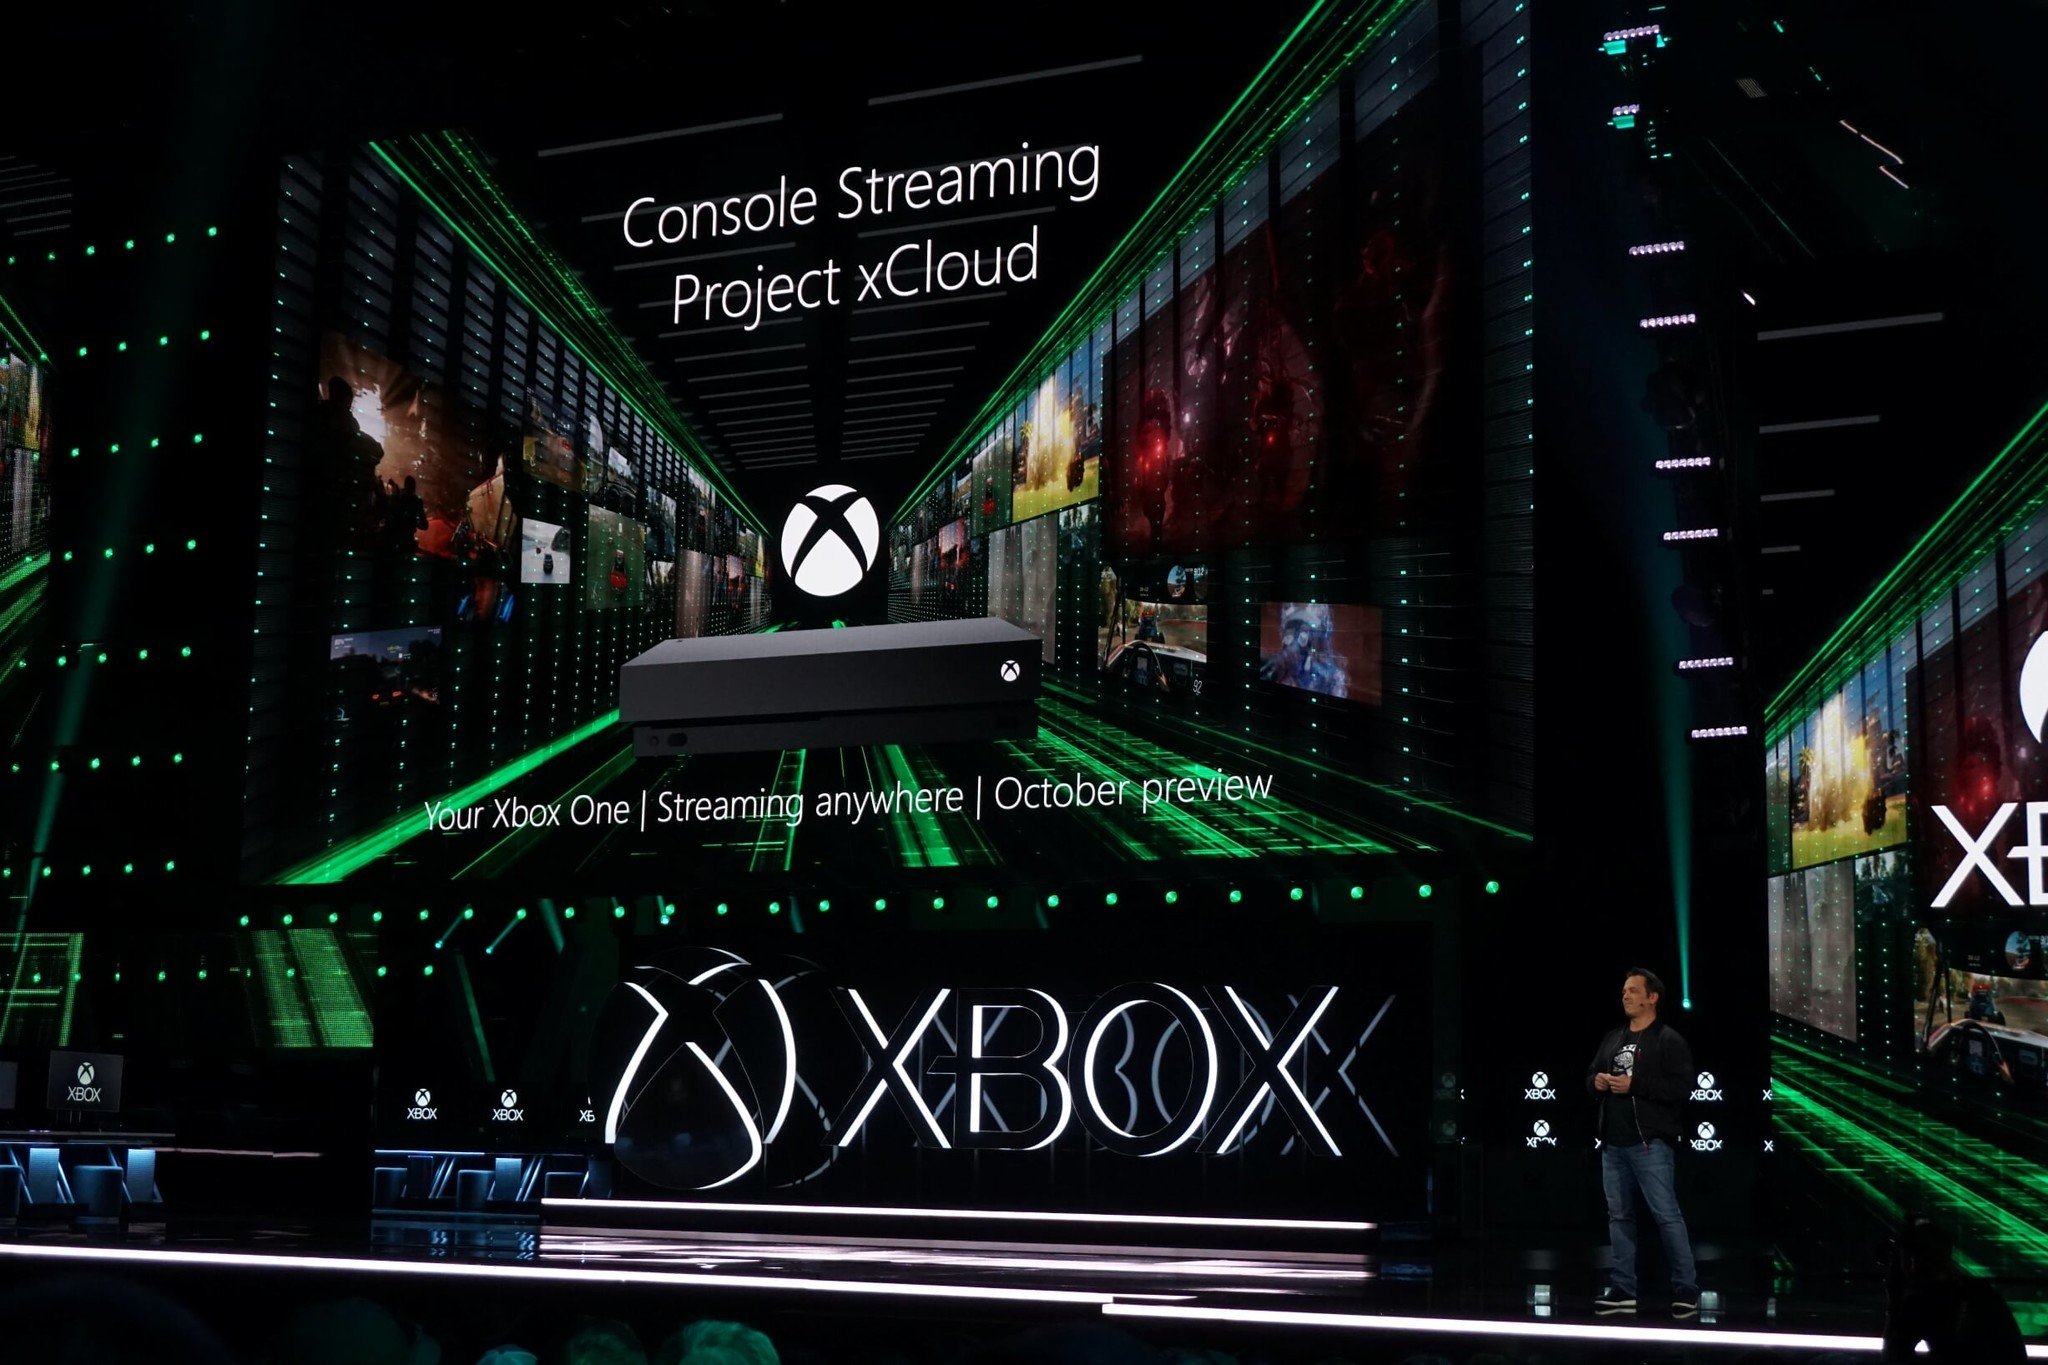 Microsoft launching Project xCloud public preview in October